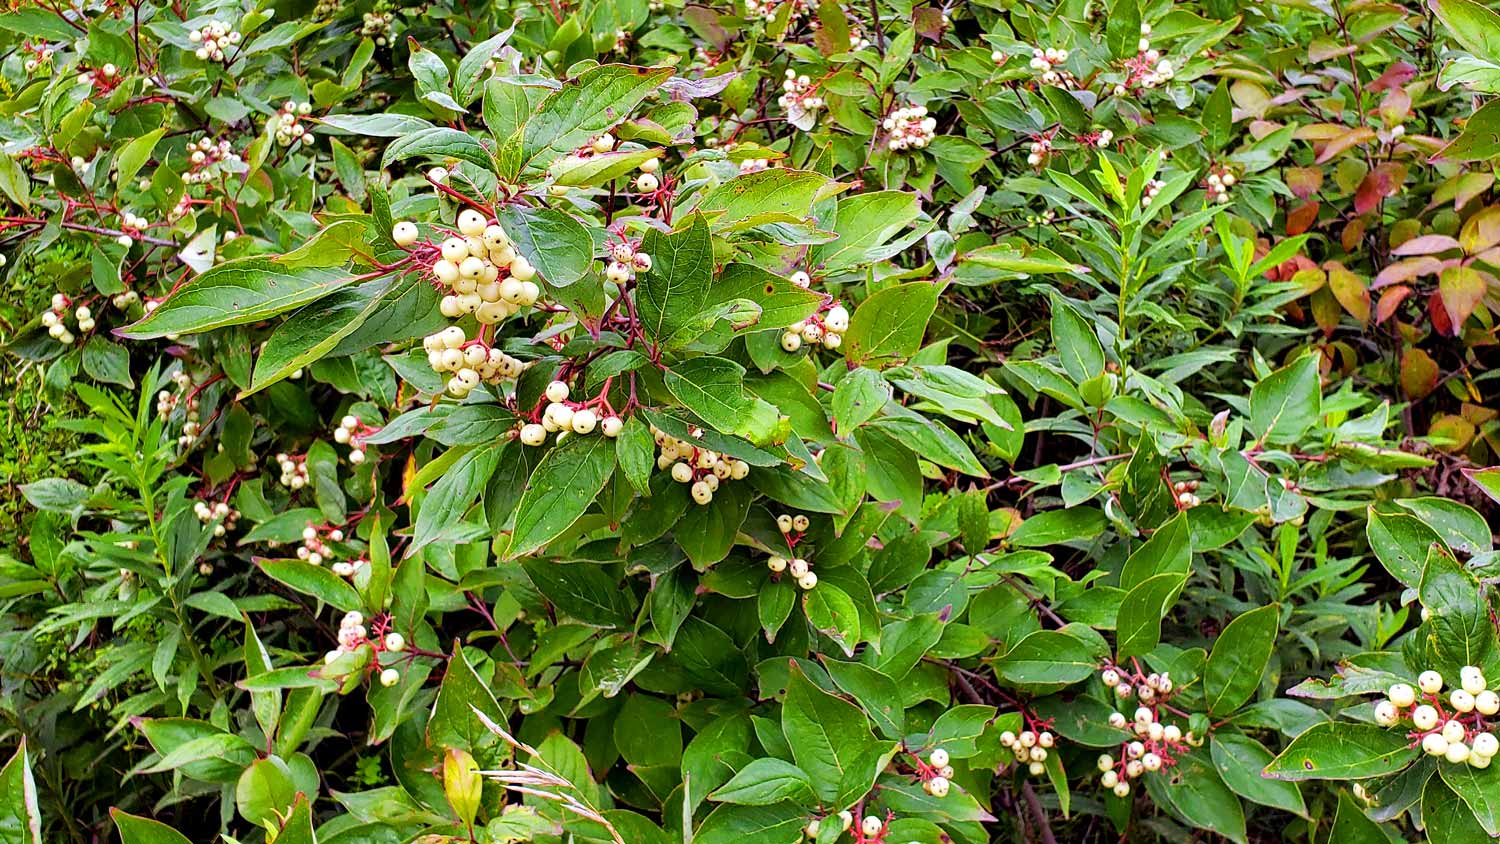 Plant with white berries at the Pleasant Valley Conservation Area.